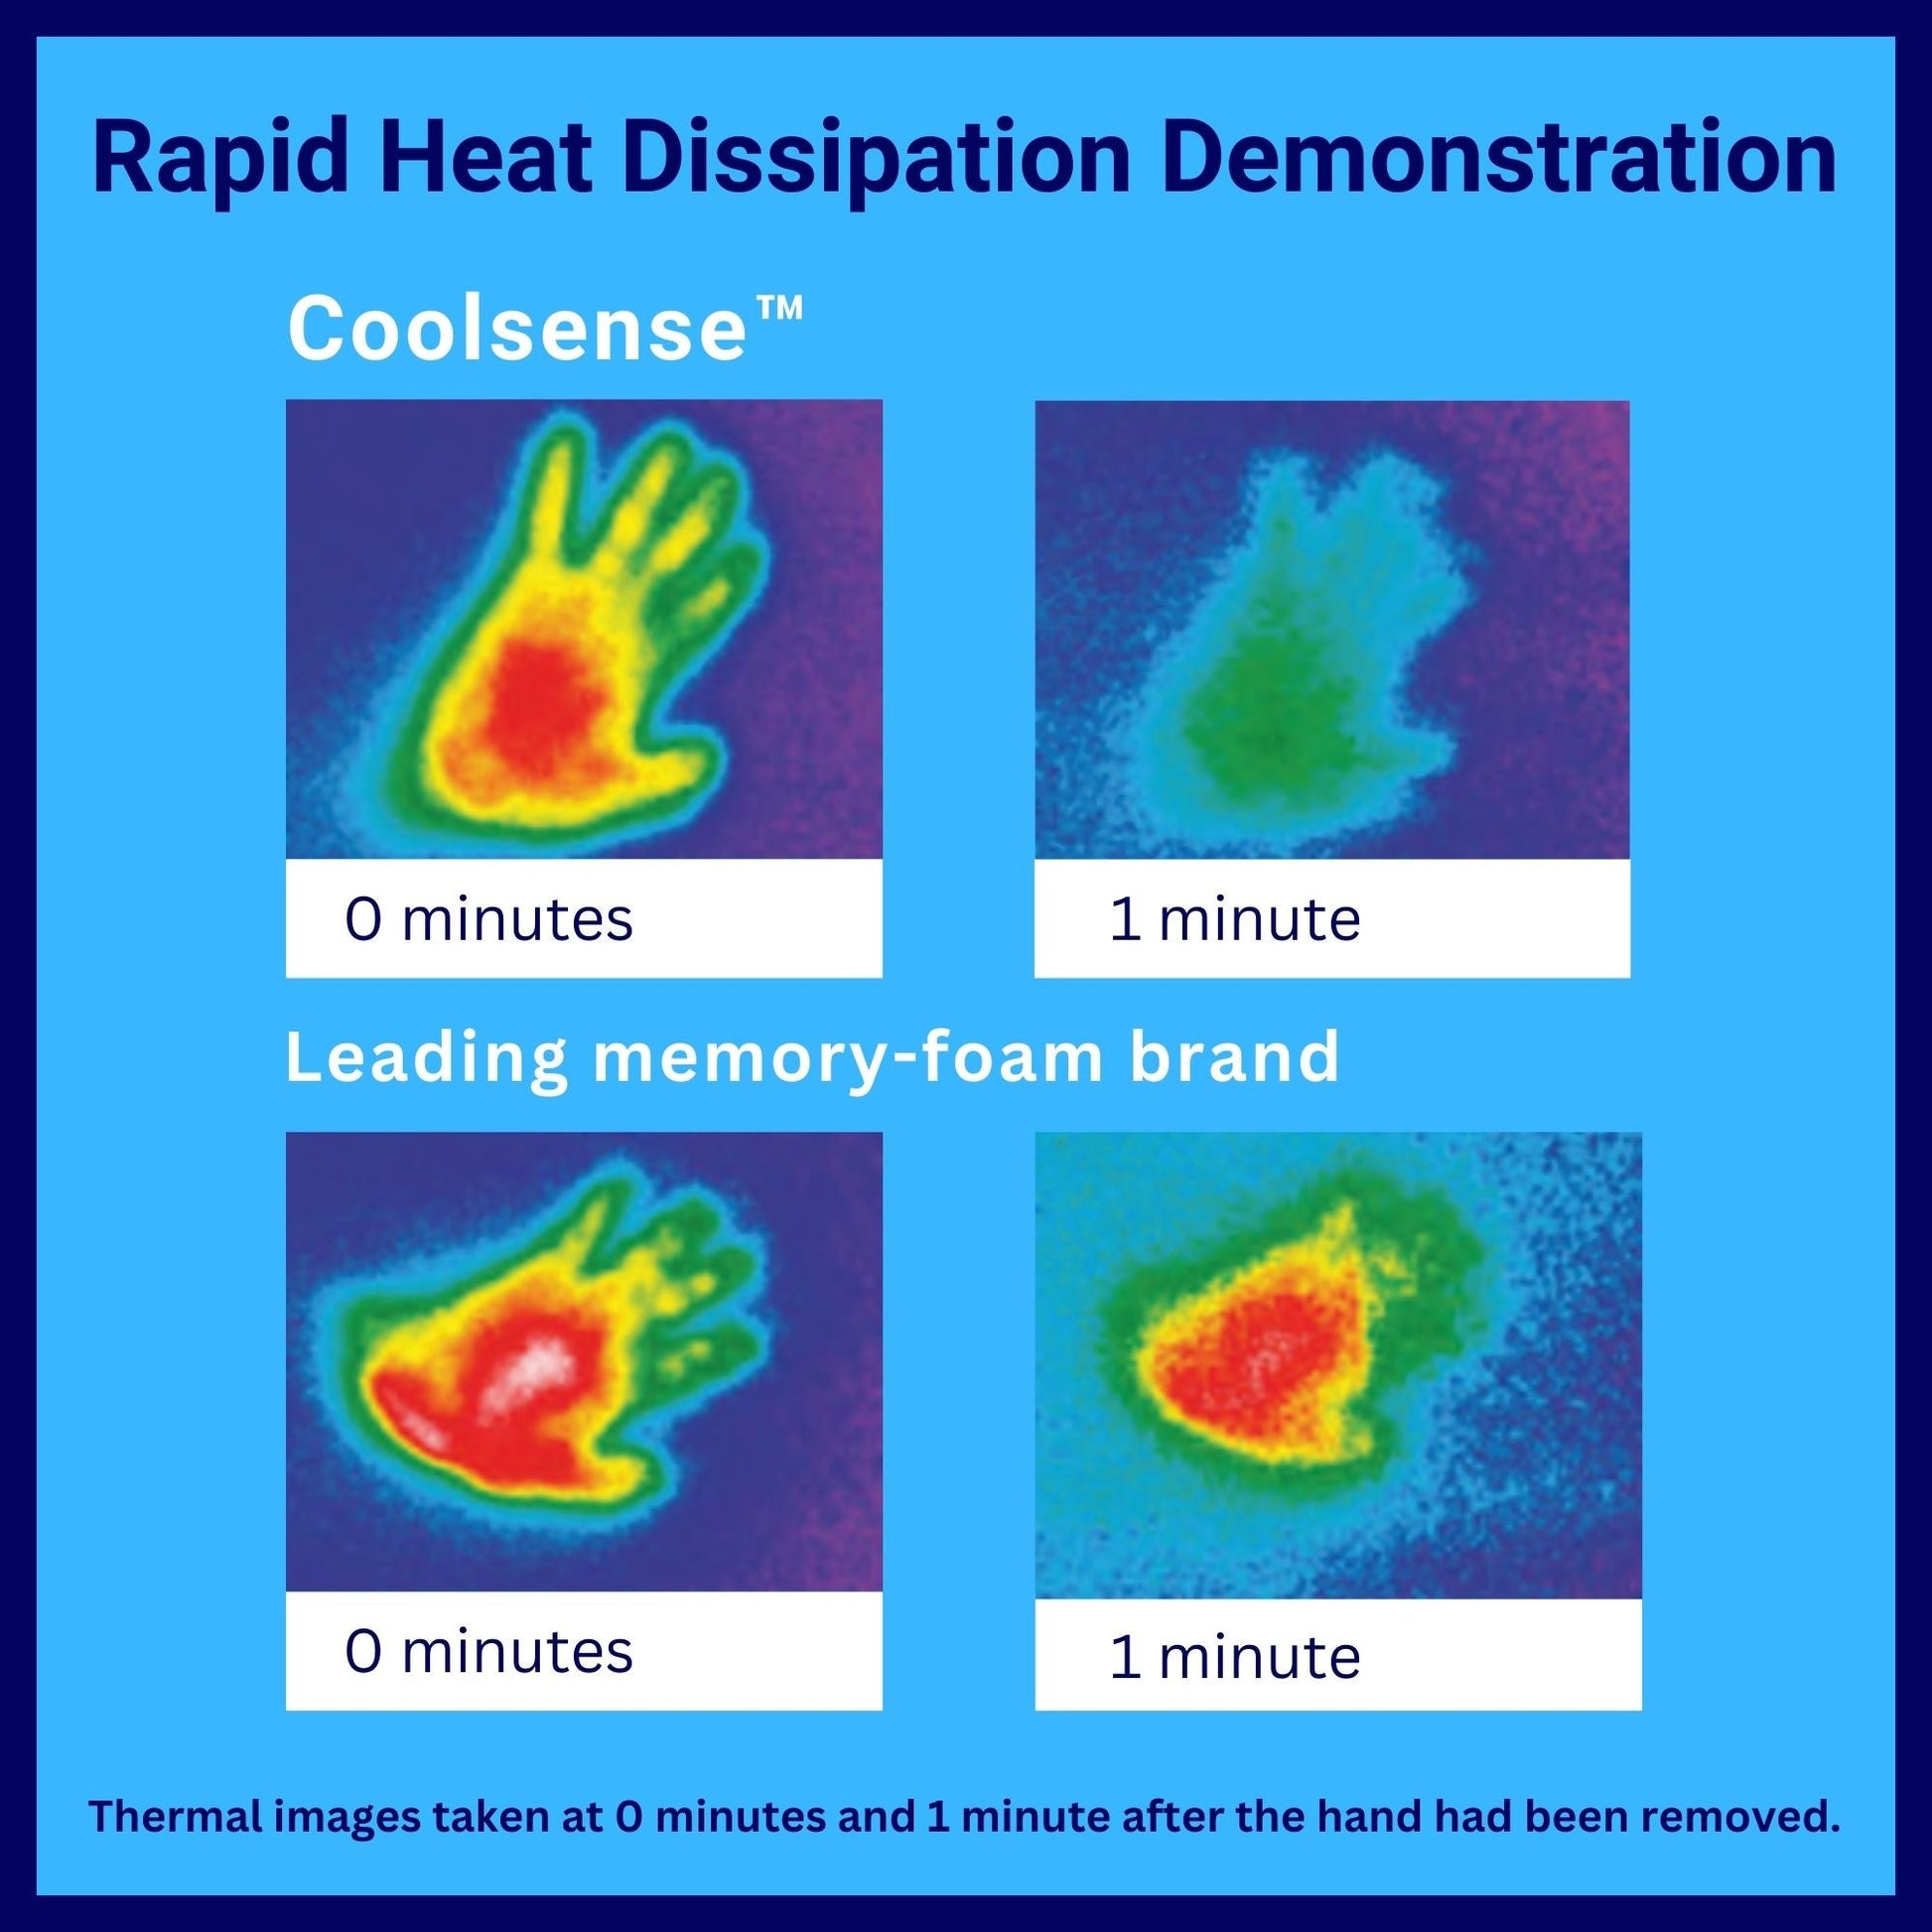 Coolsense promotion banner showing showing thermal imaging technology dissipate heat away from the body.